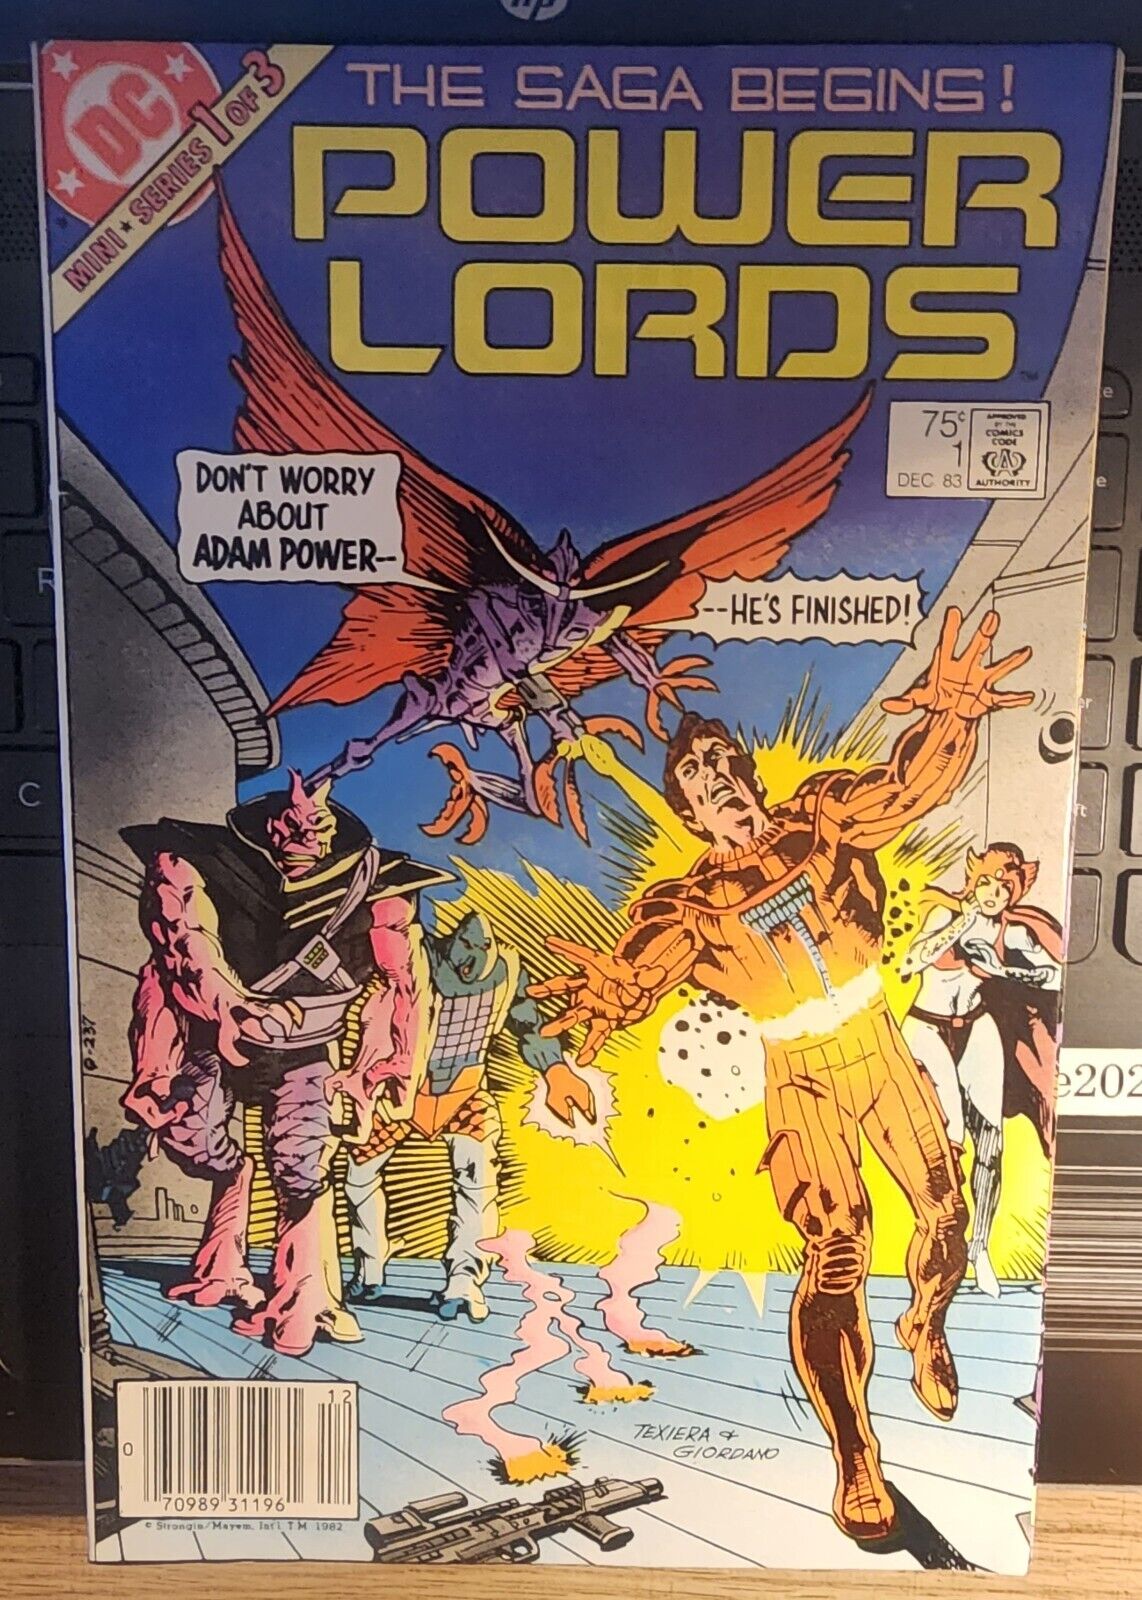 Power Lords 1 2 3 DC